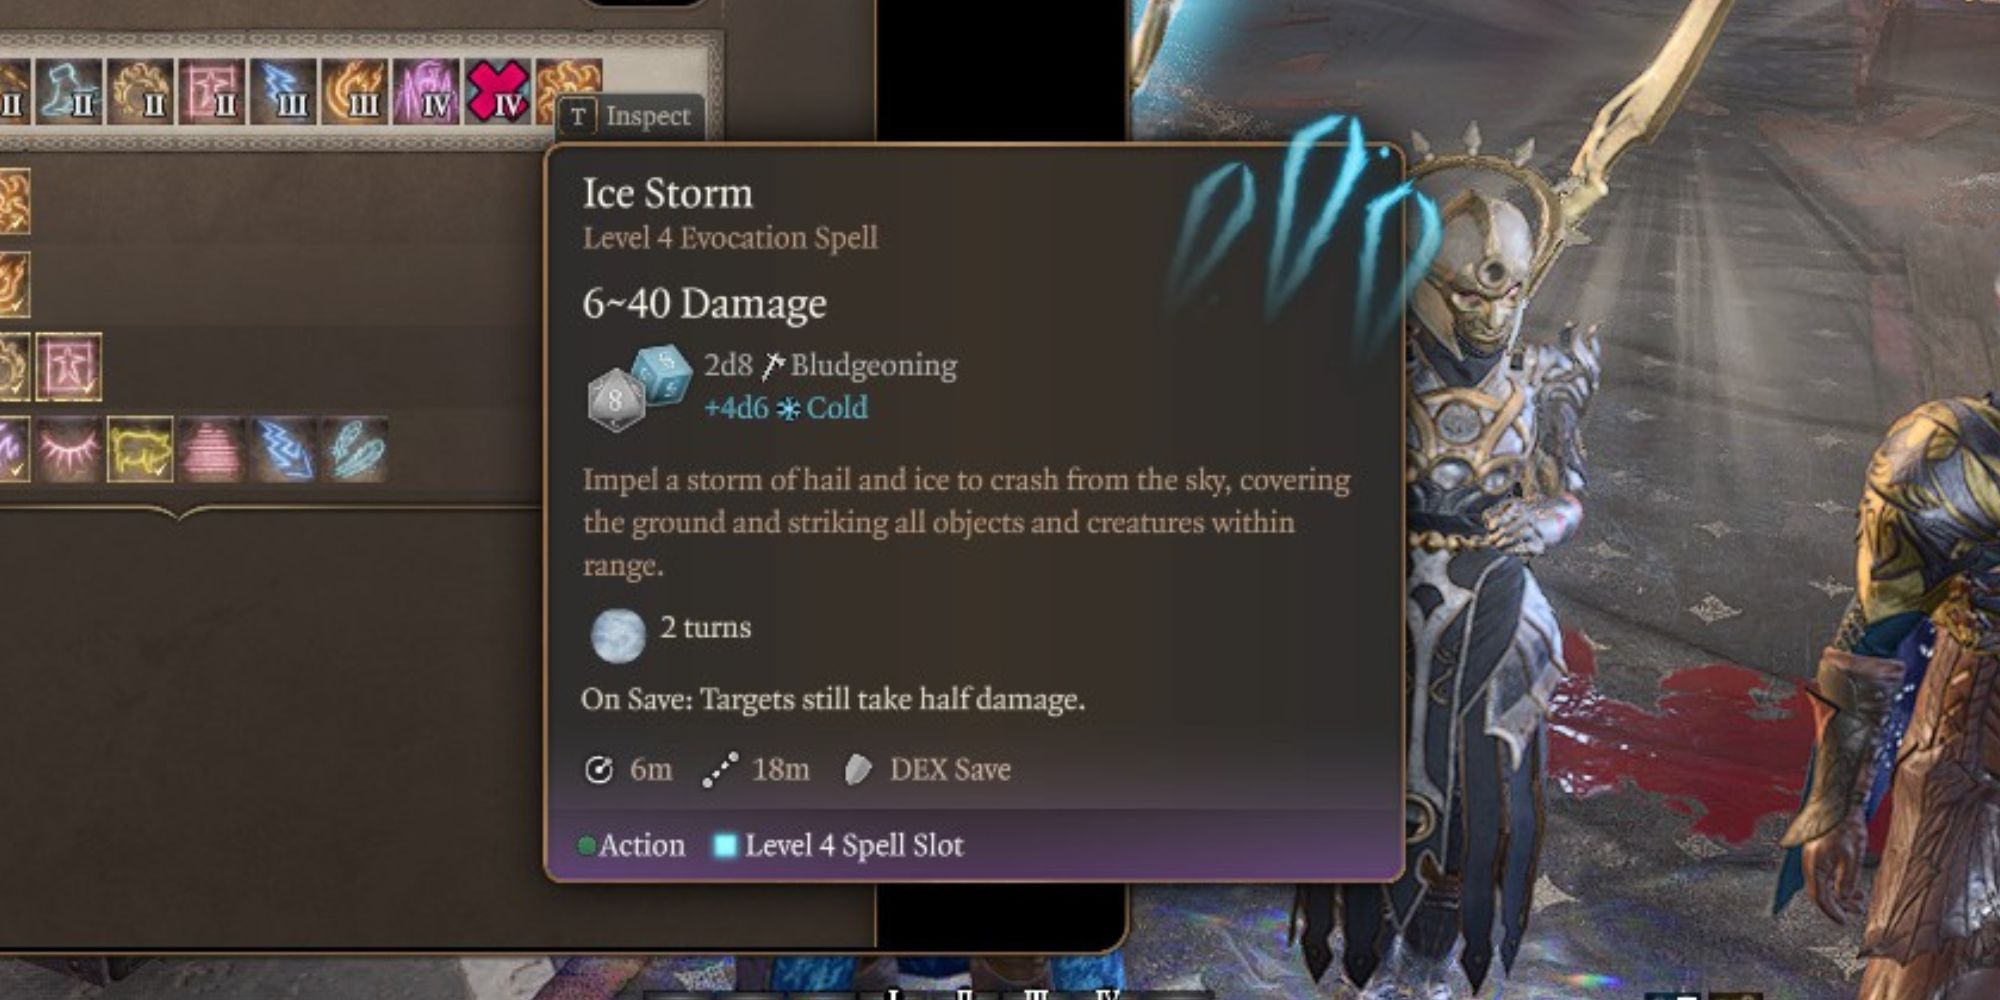 The Ice Storm spell in the inventory screen in Baldur's Gate 3